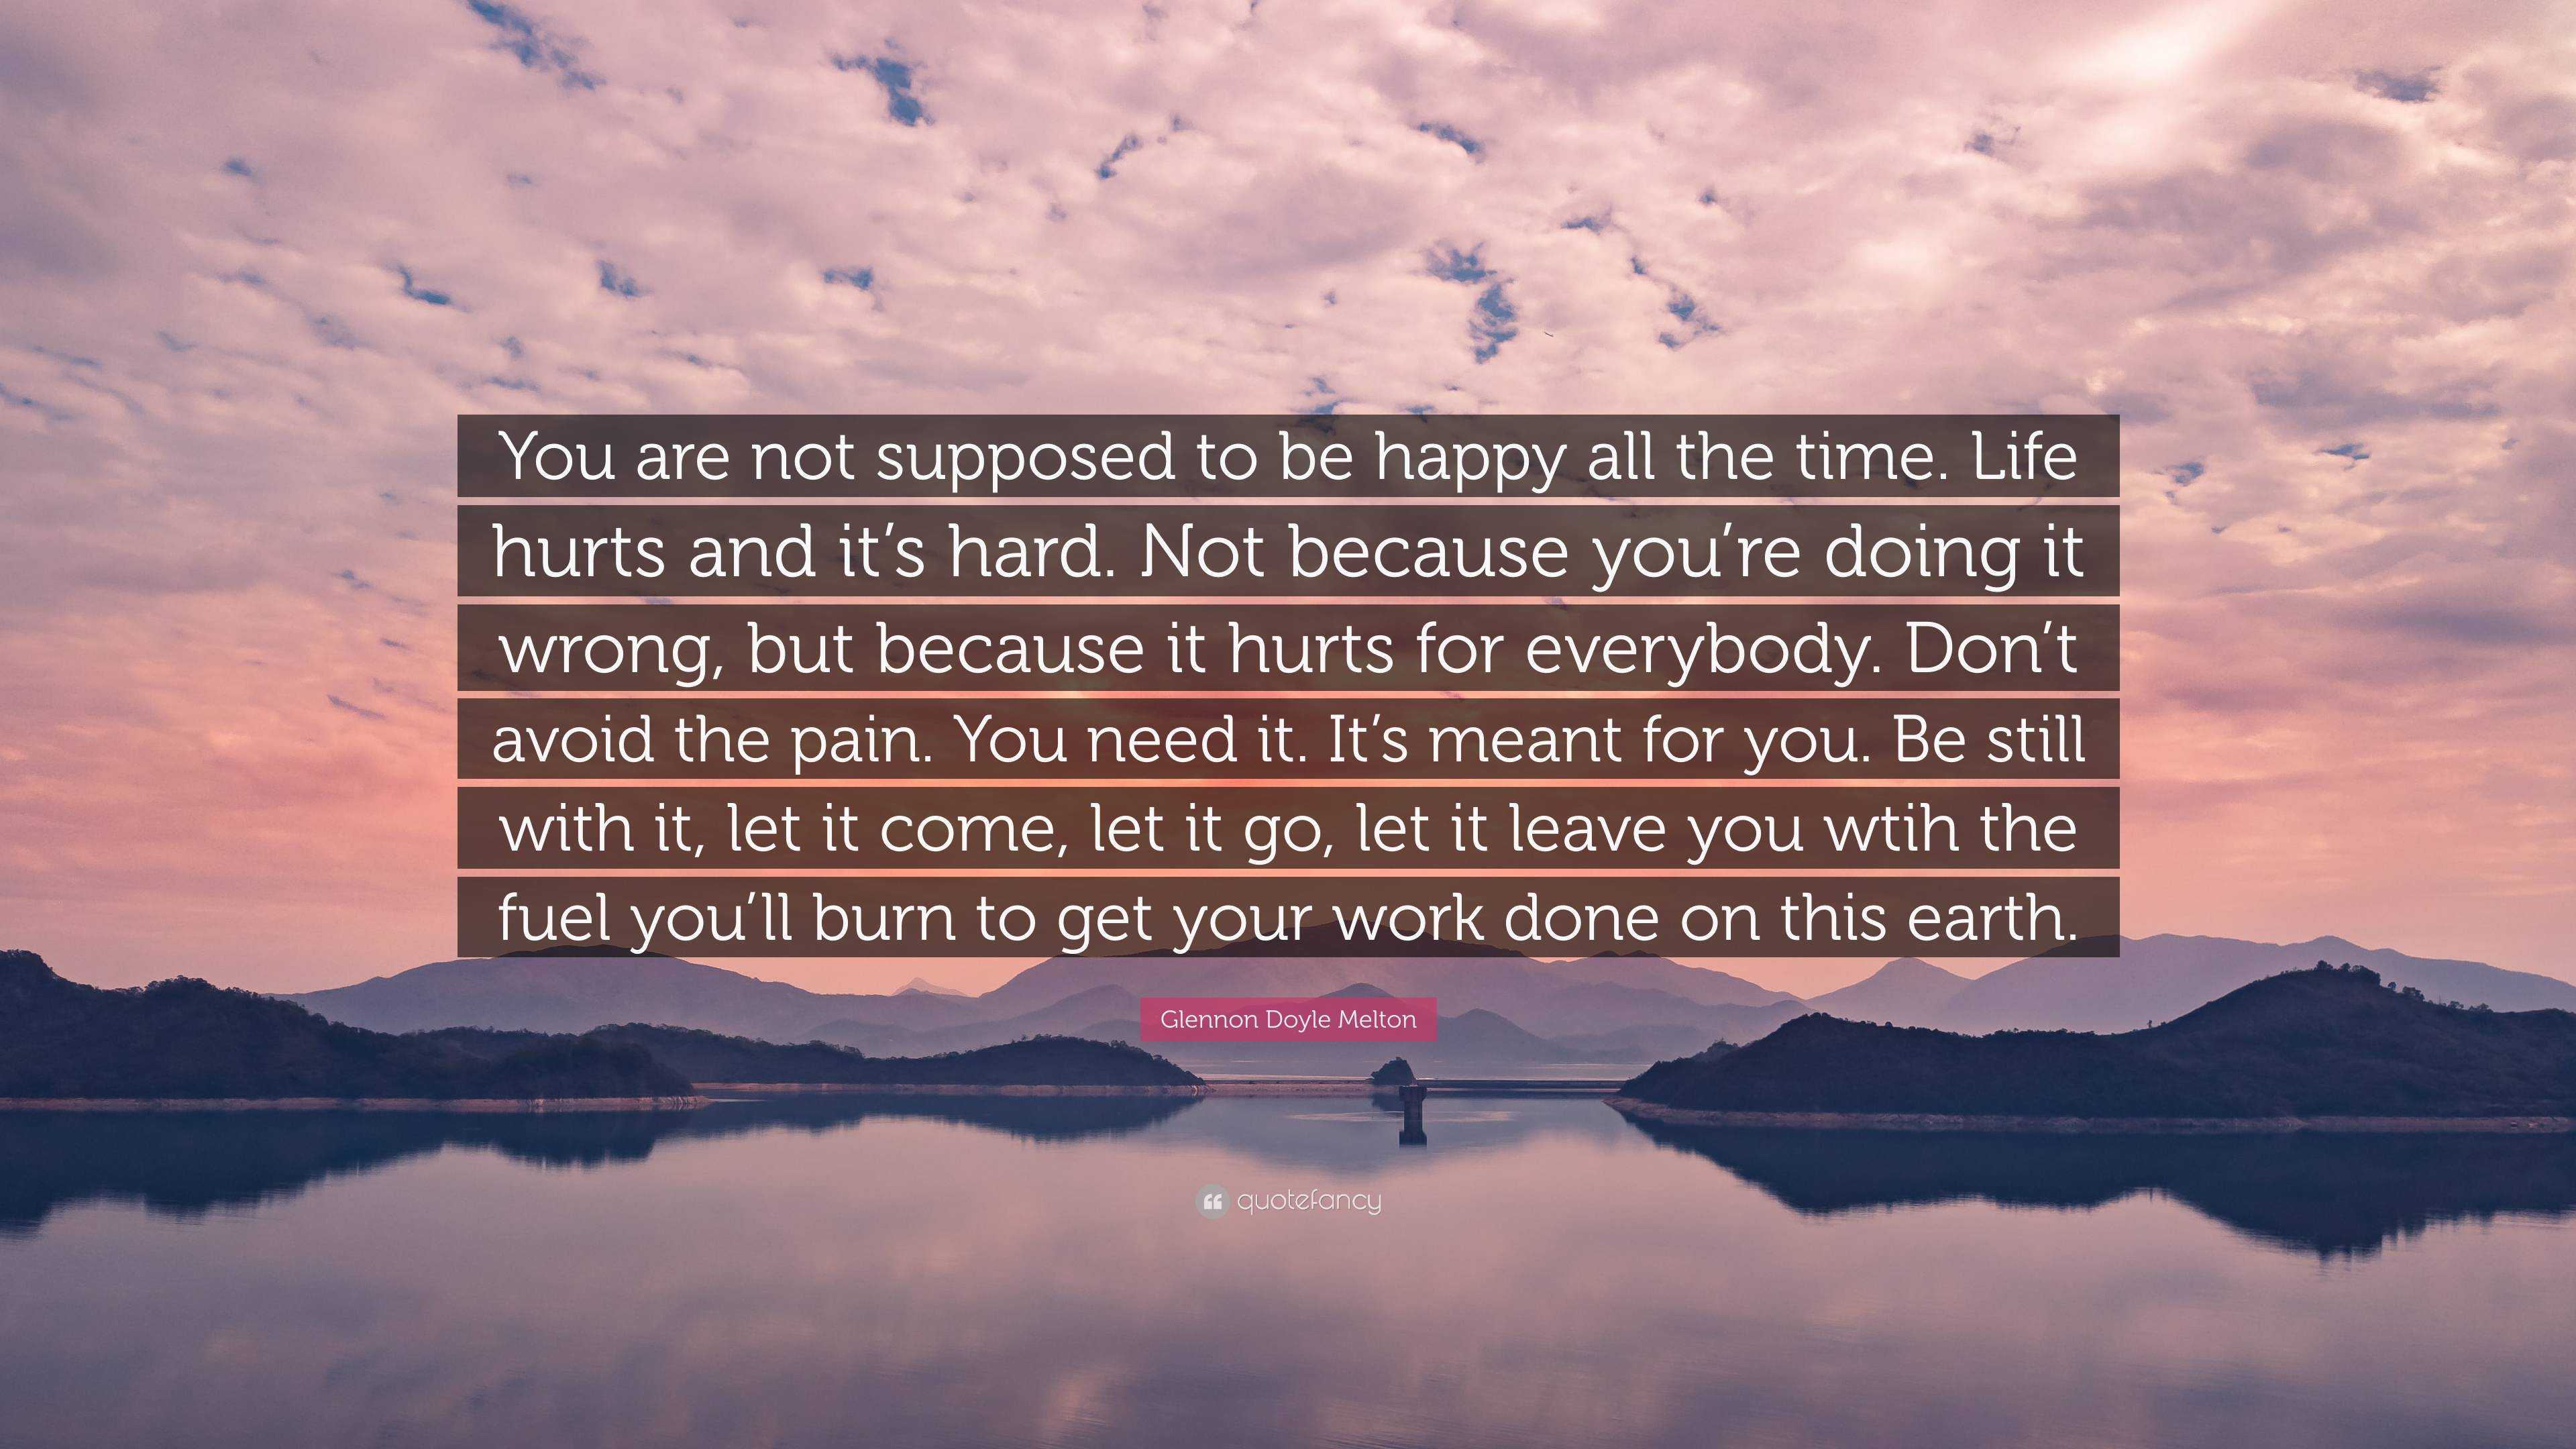 Glennon Doyle Melton Quote: “You are not supposed to be happy all the